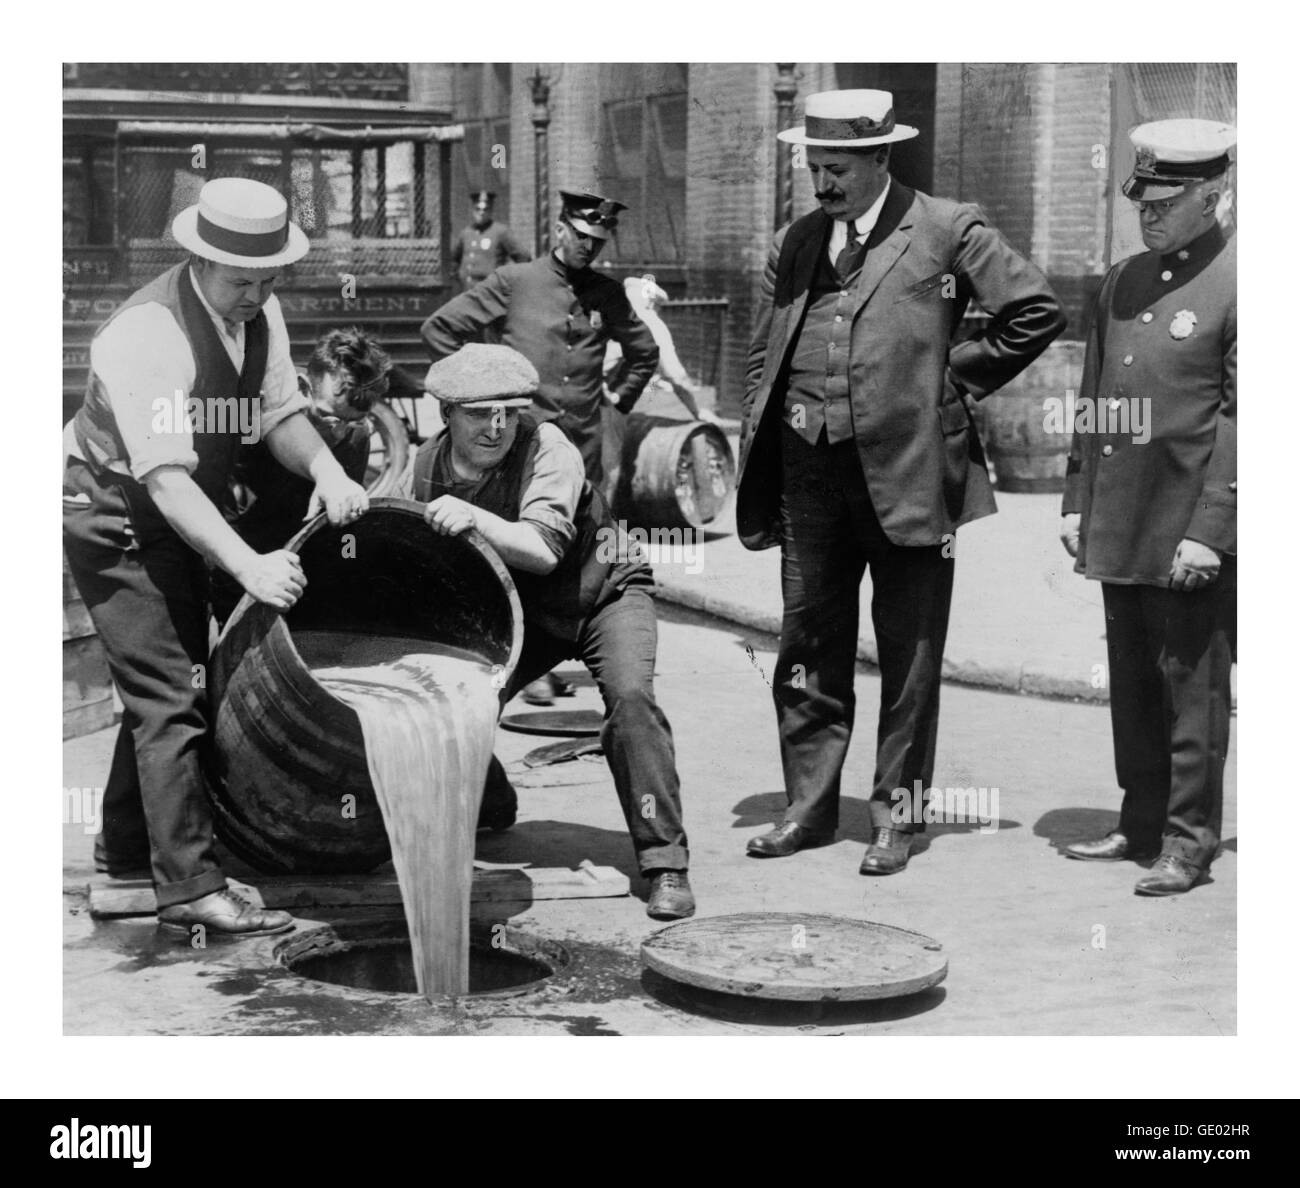 PROHIBITION Alcohol is being poured out of a barrel down the sewers during American 1919 prohibition laws and bootlegging days in the USA Stock Photo